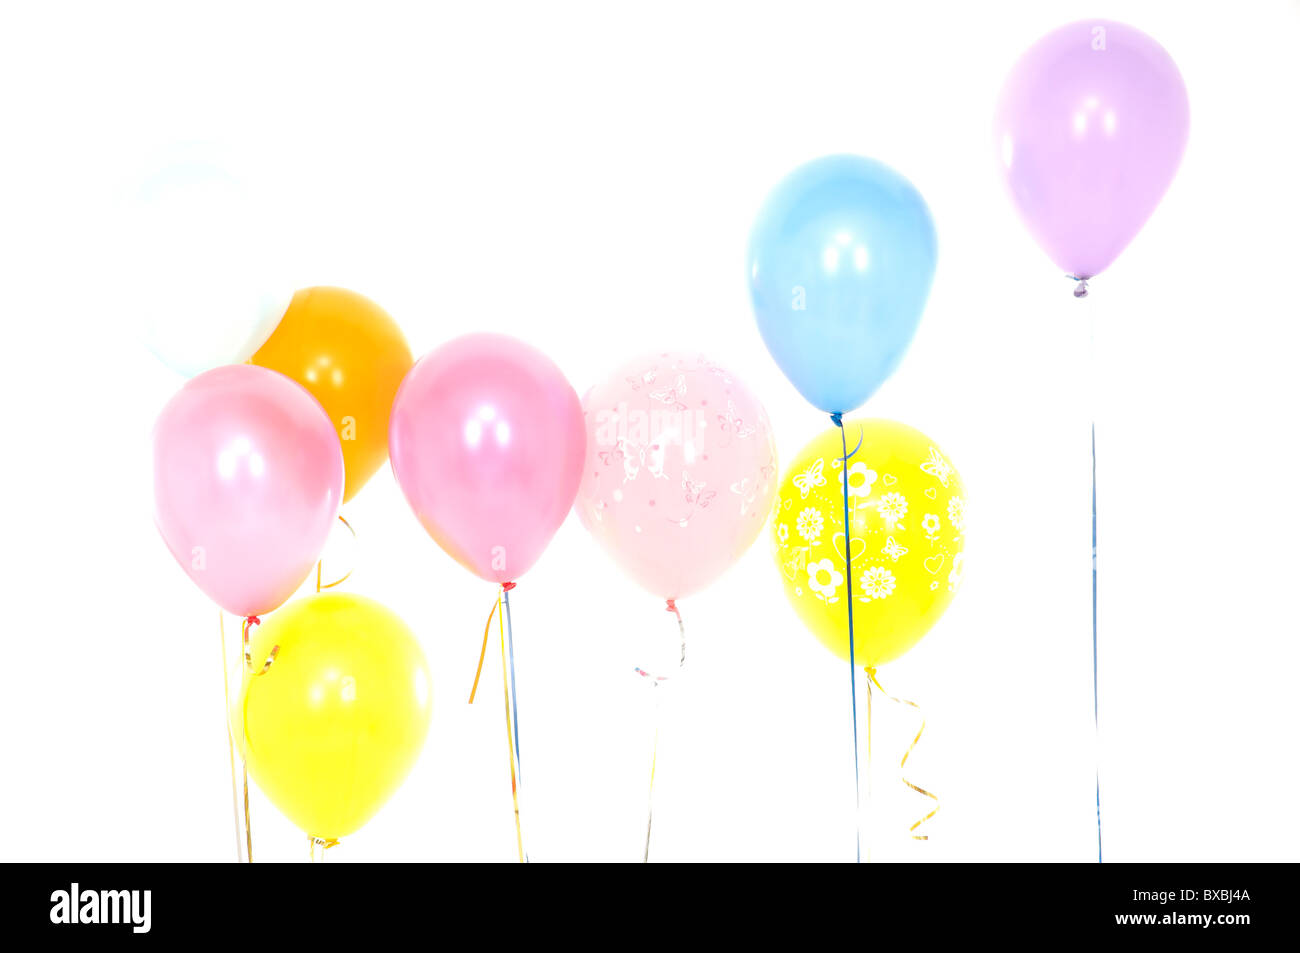 Colorful balloons in a birthday party Stock Photo